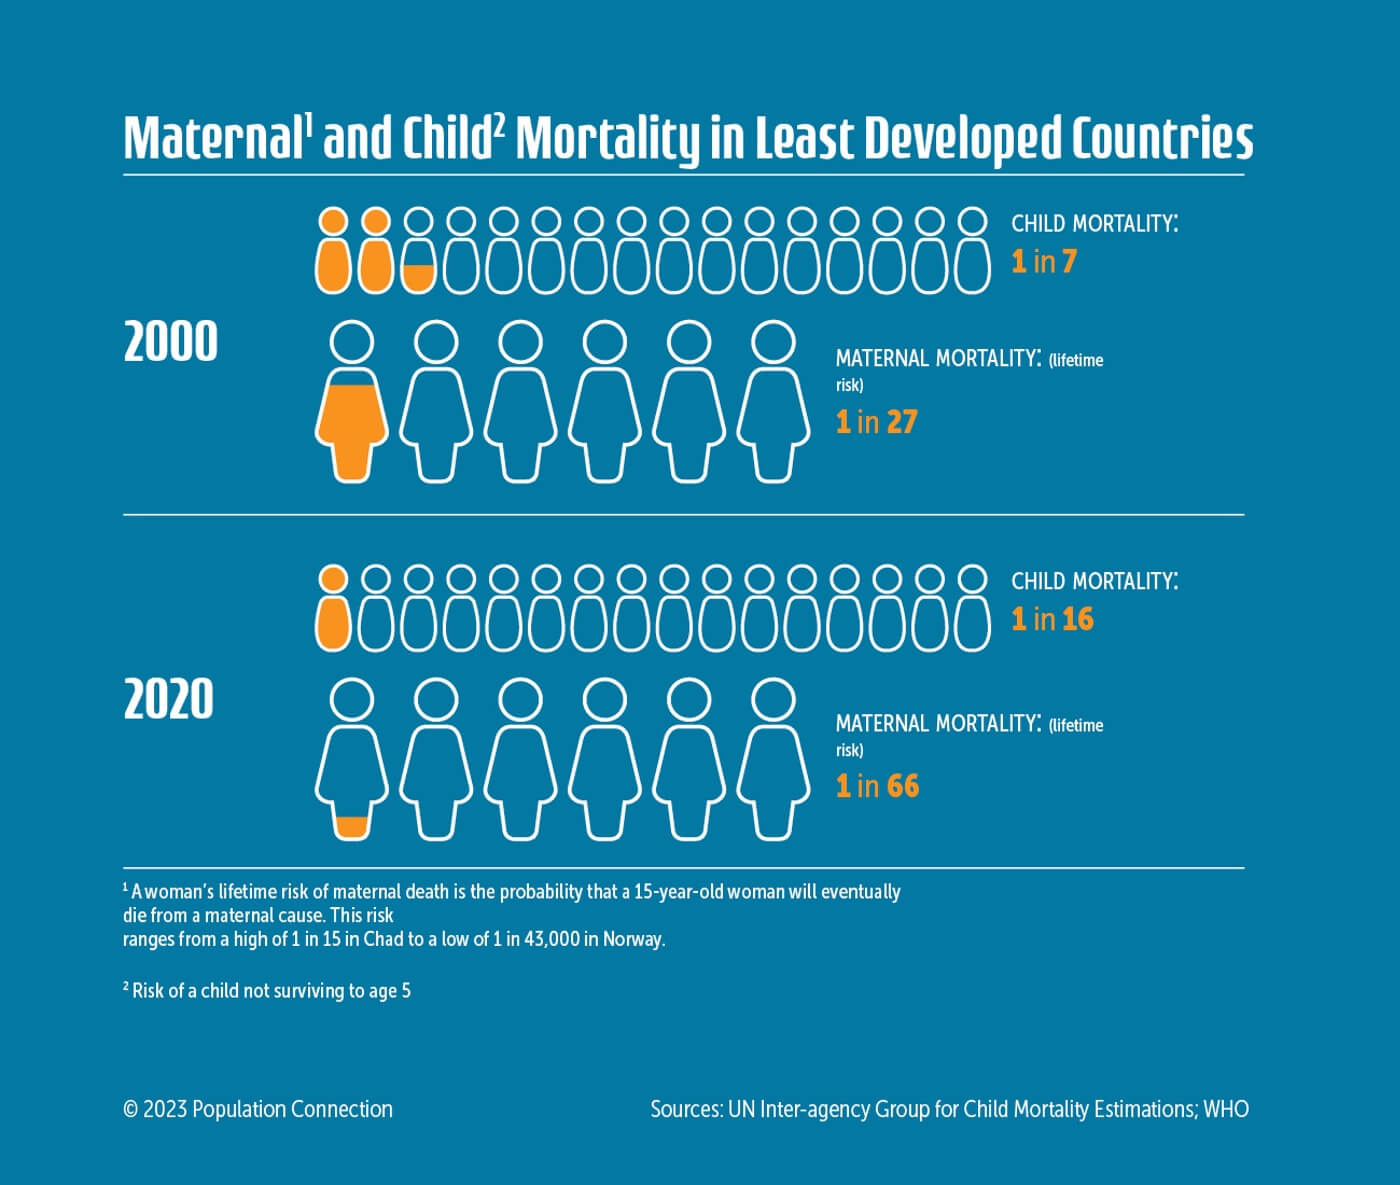 An infographic that compares maternal and child mortality in least developed countries from 2000 and 2020